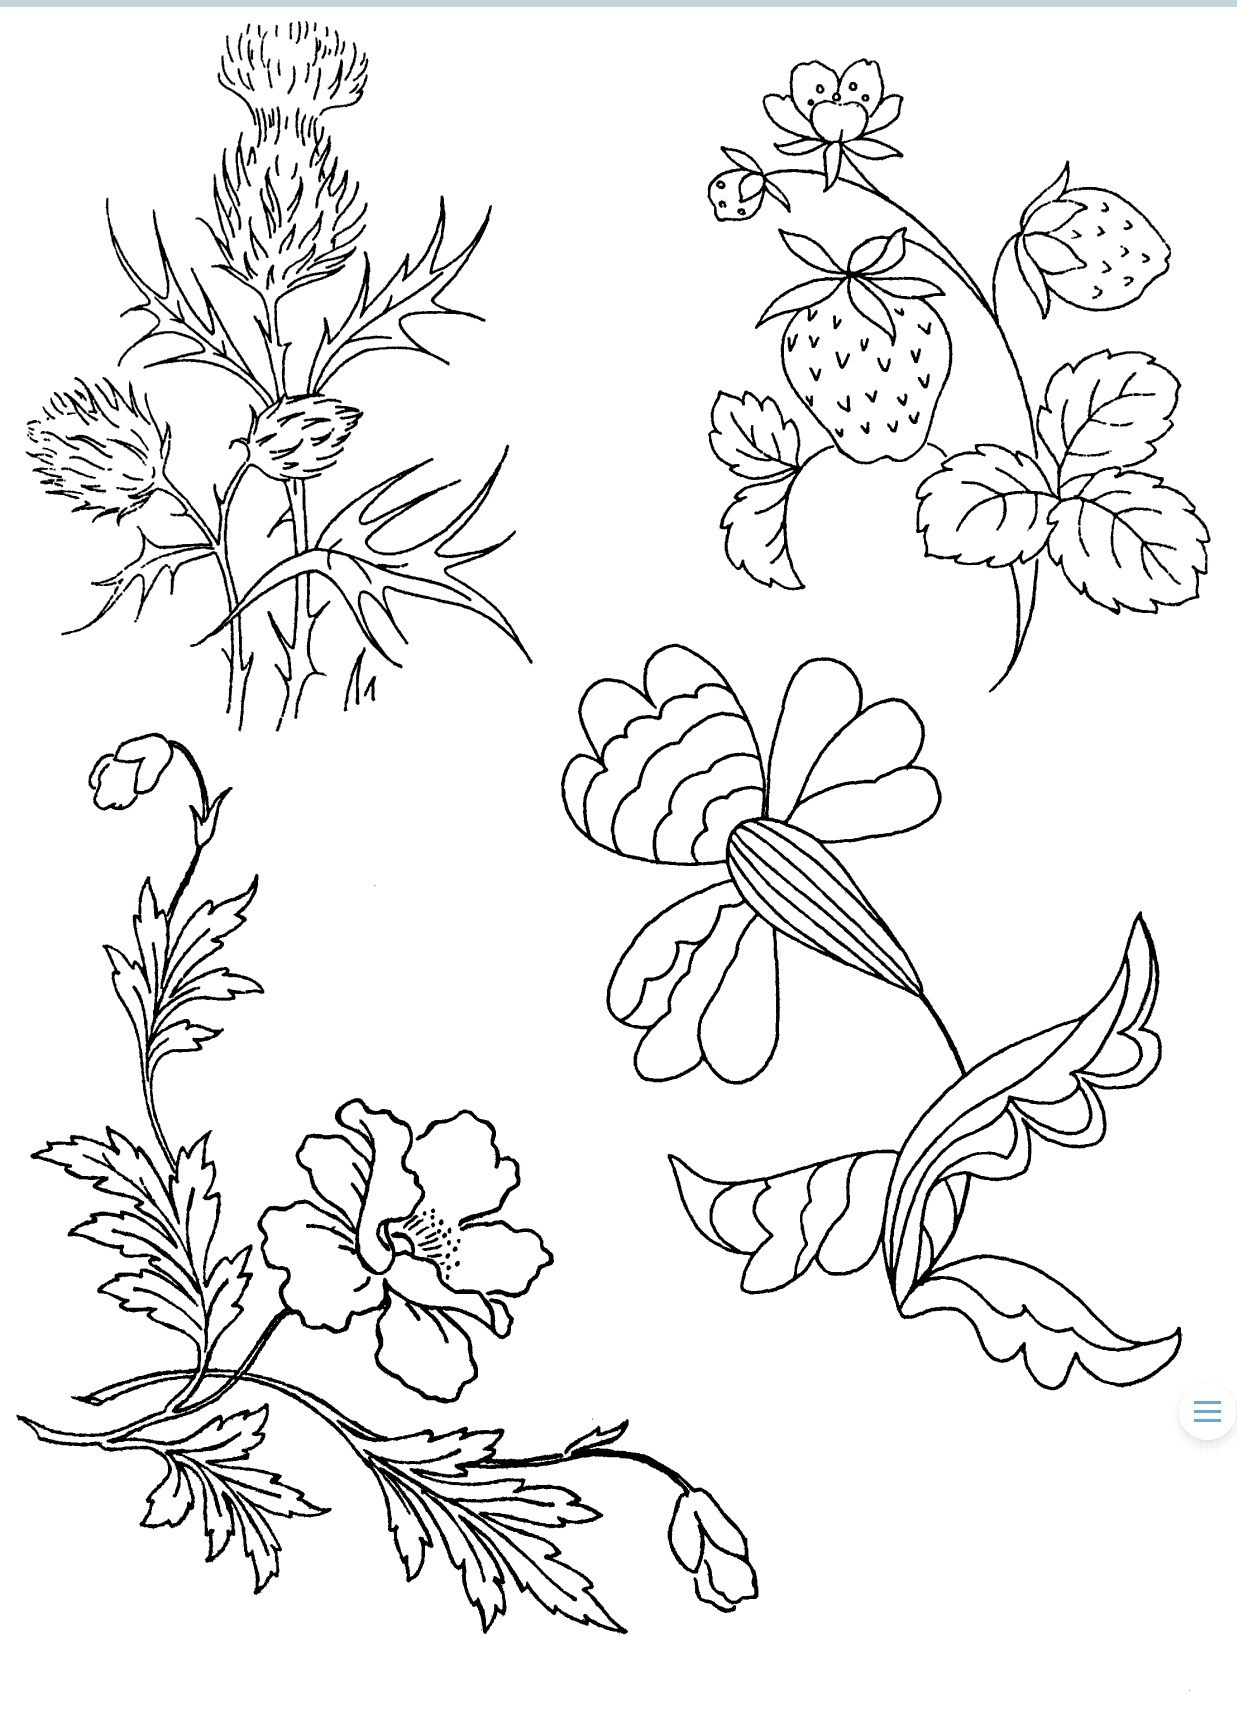 Free Embroidery Patterns Embroidery Patterns Free Pdf Lots Of Patterns